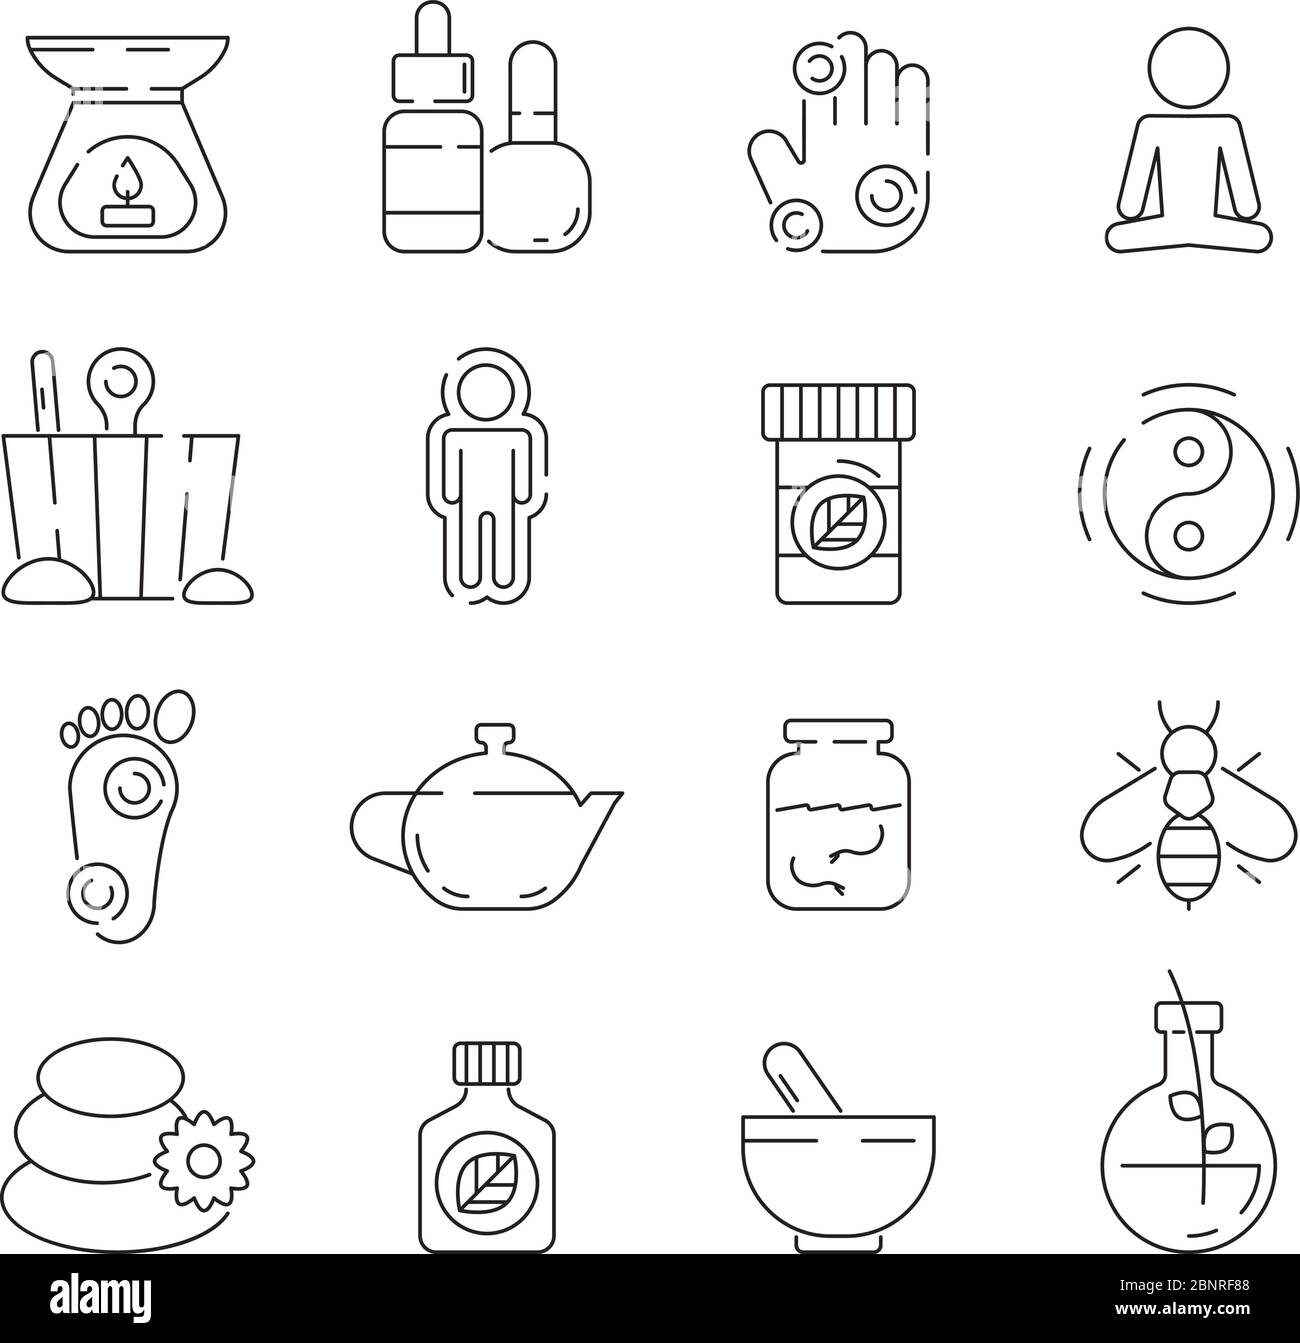 Alternative medicine icon. Beauty complementary naturopath herbal therapy relaxation meditation vector thin symbols Stock Vector